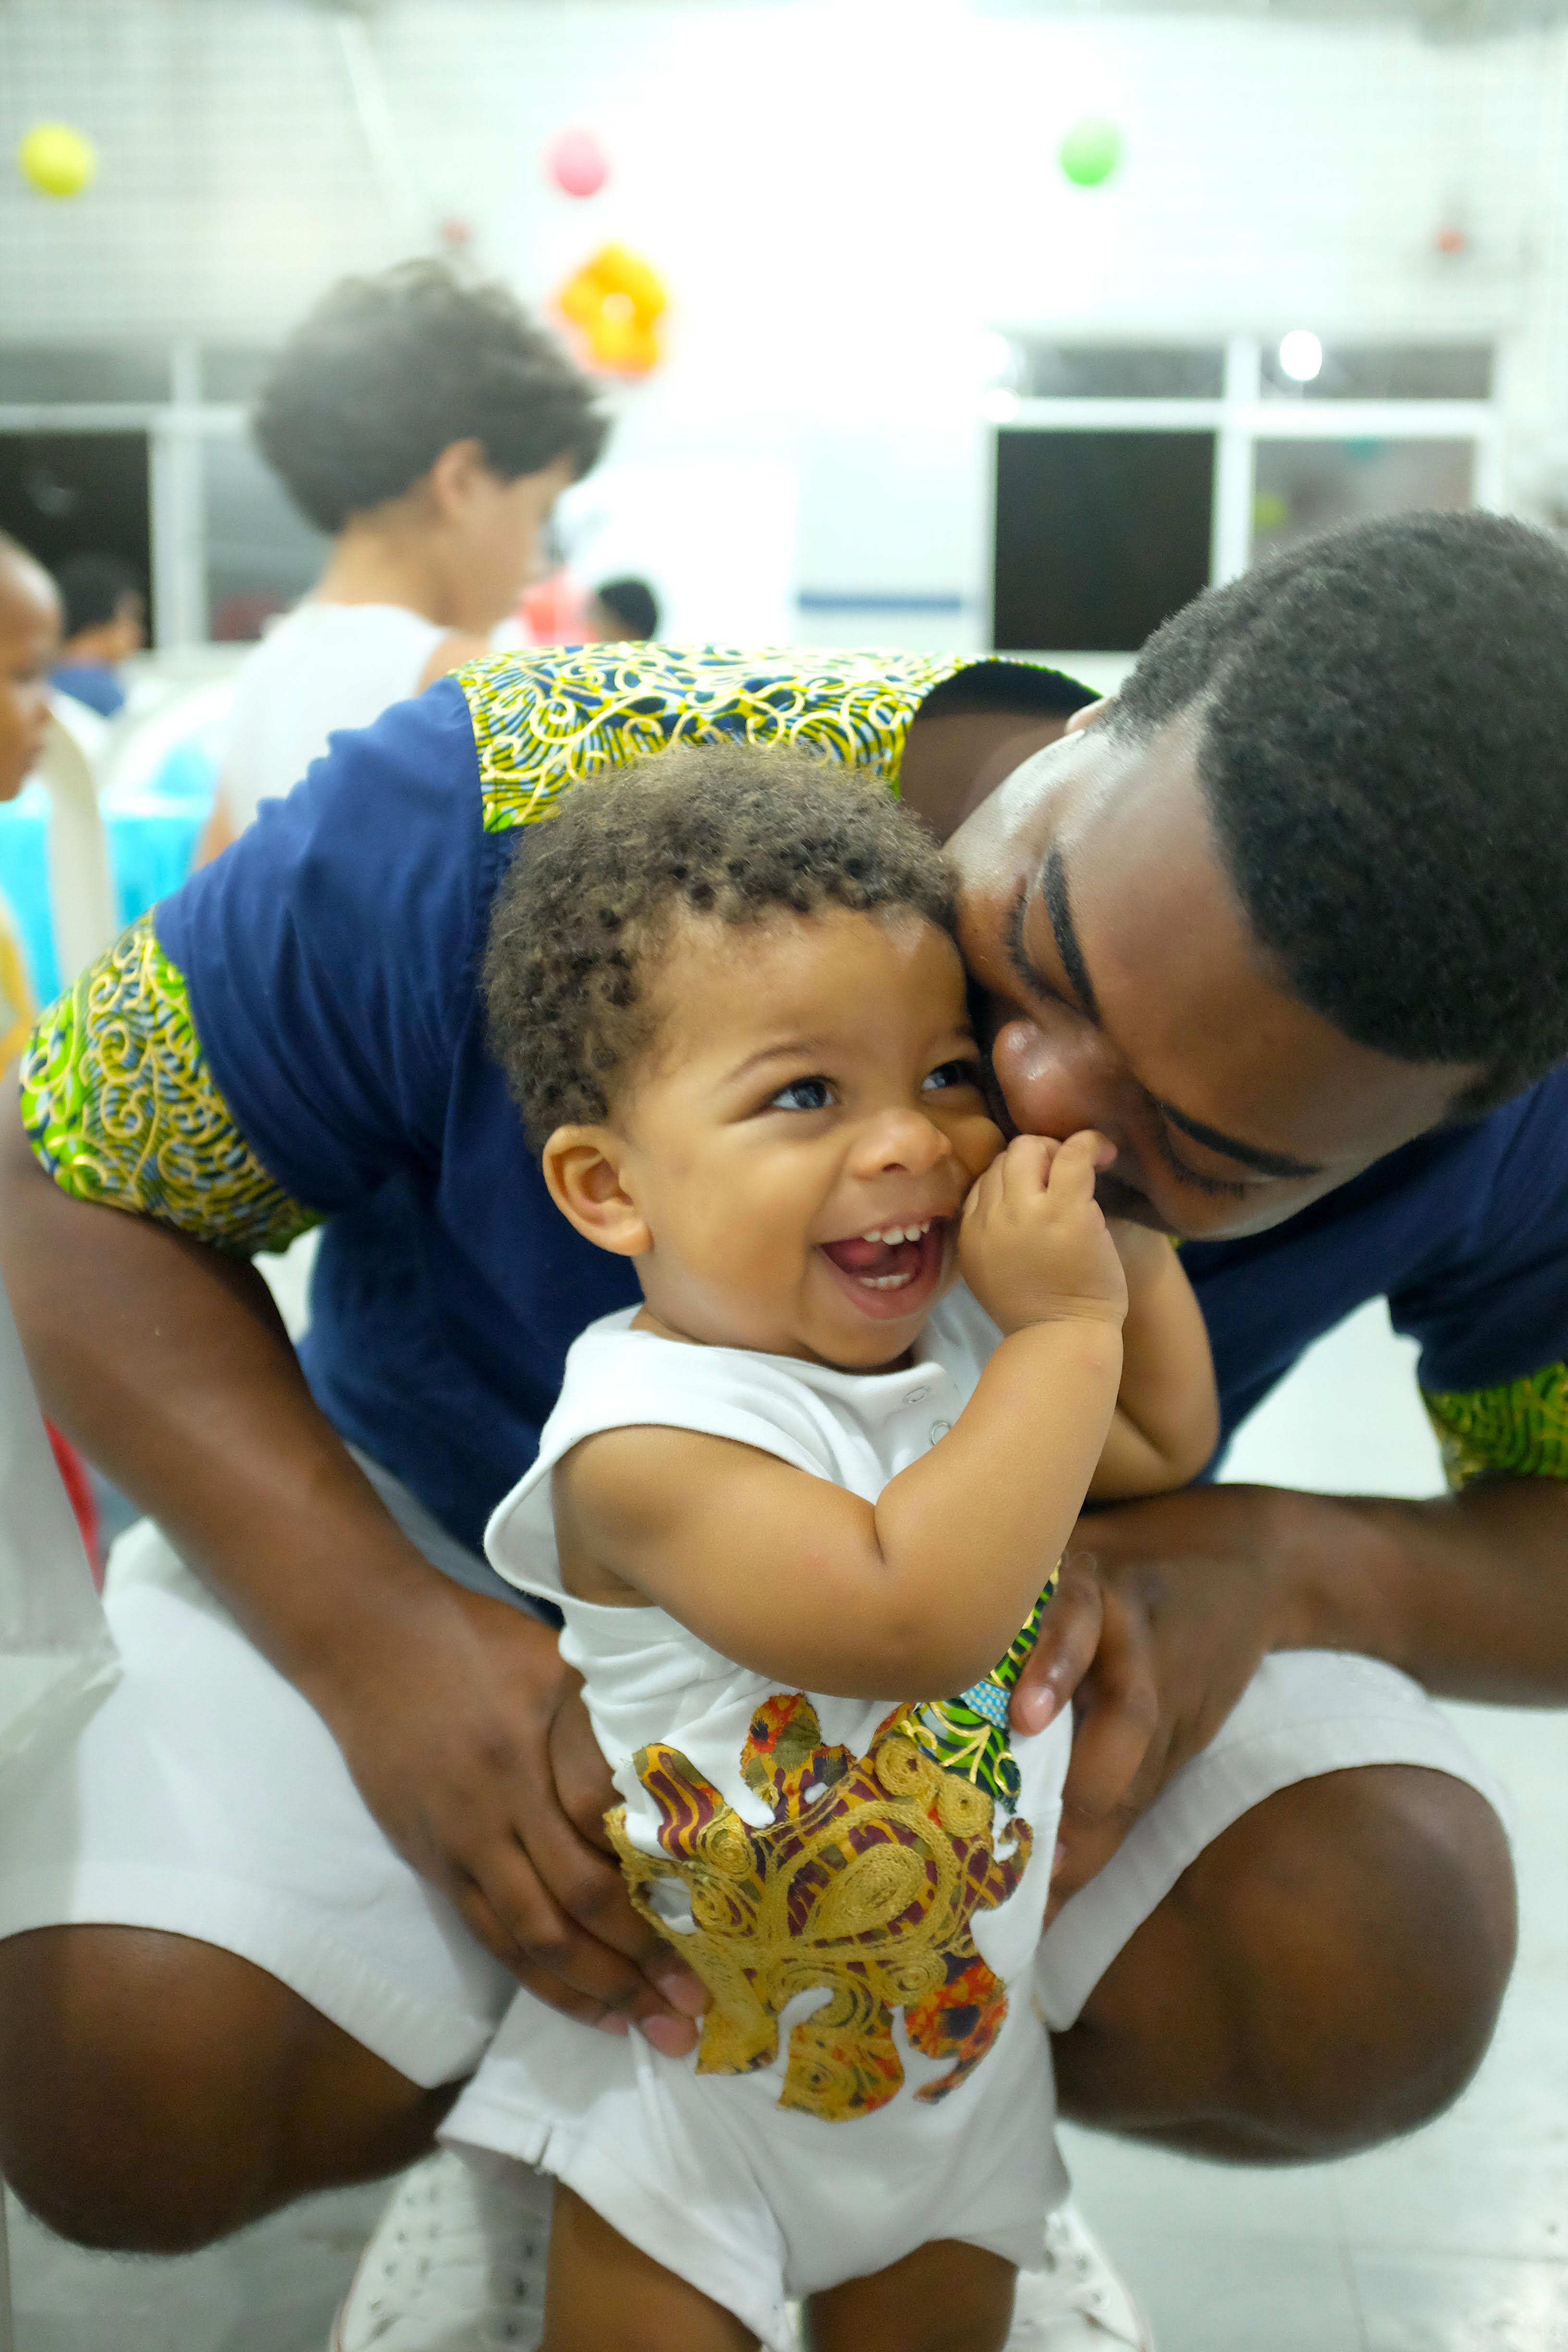 At his first birthday party in Salvador, Bahia, Brazil (2015). I whisper in his ear all the time. This night I told him "Pai (father) will love you forever."